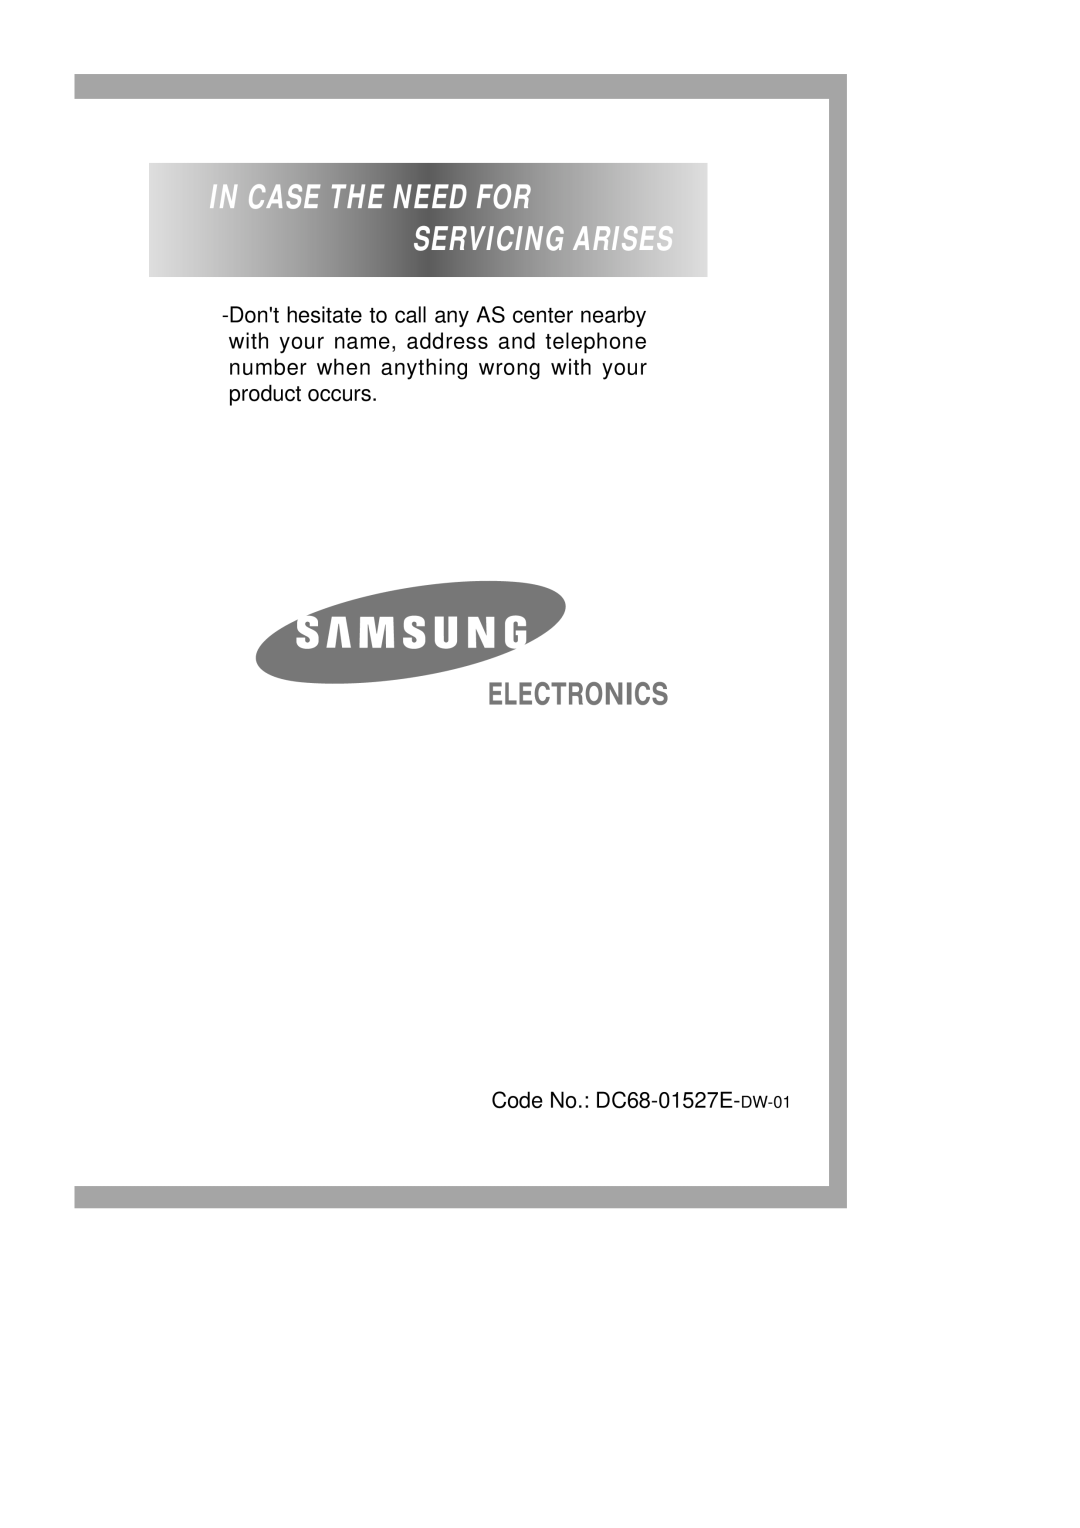 Samsung B1113J B913J manual In Case The Need For Servicing Arises, Code No. DC68-01527E-DW-01 